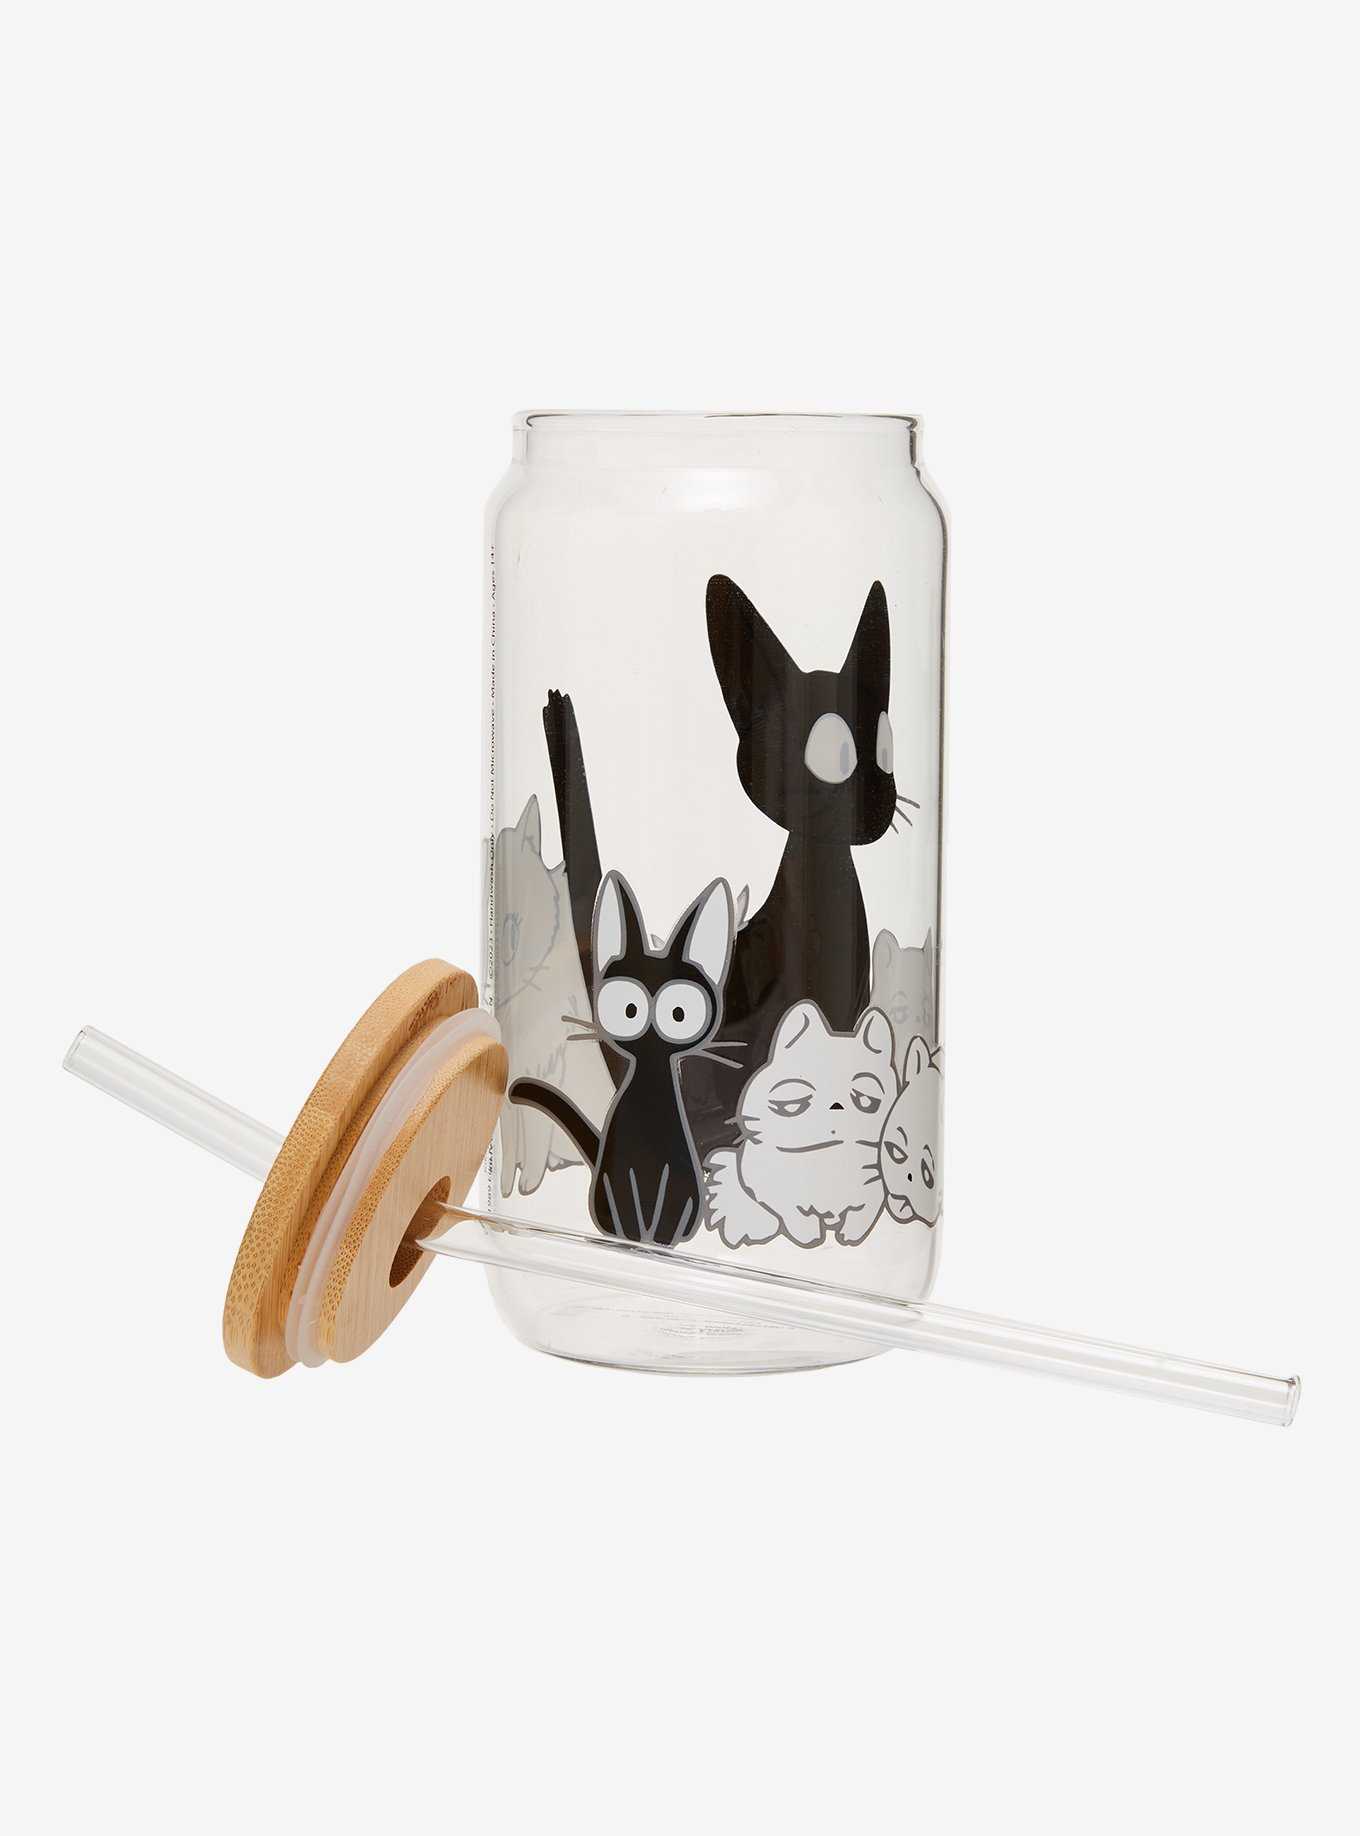 Studio Ghibli Kiki's Delivery Service Jiji & Lily Kittens Glass Cup with Lid & Straw - BoxLunch Exclusive, , hi-res